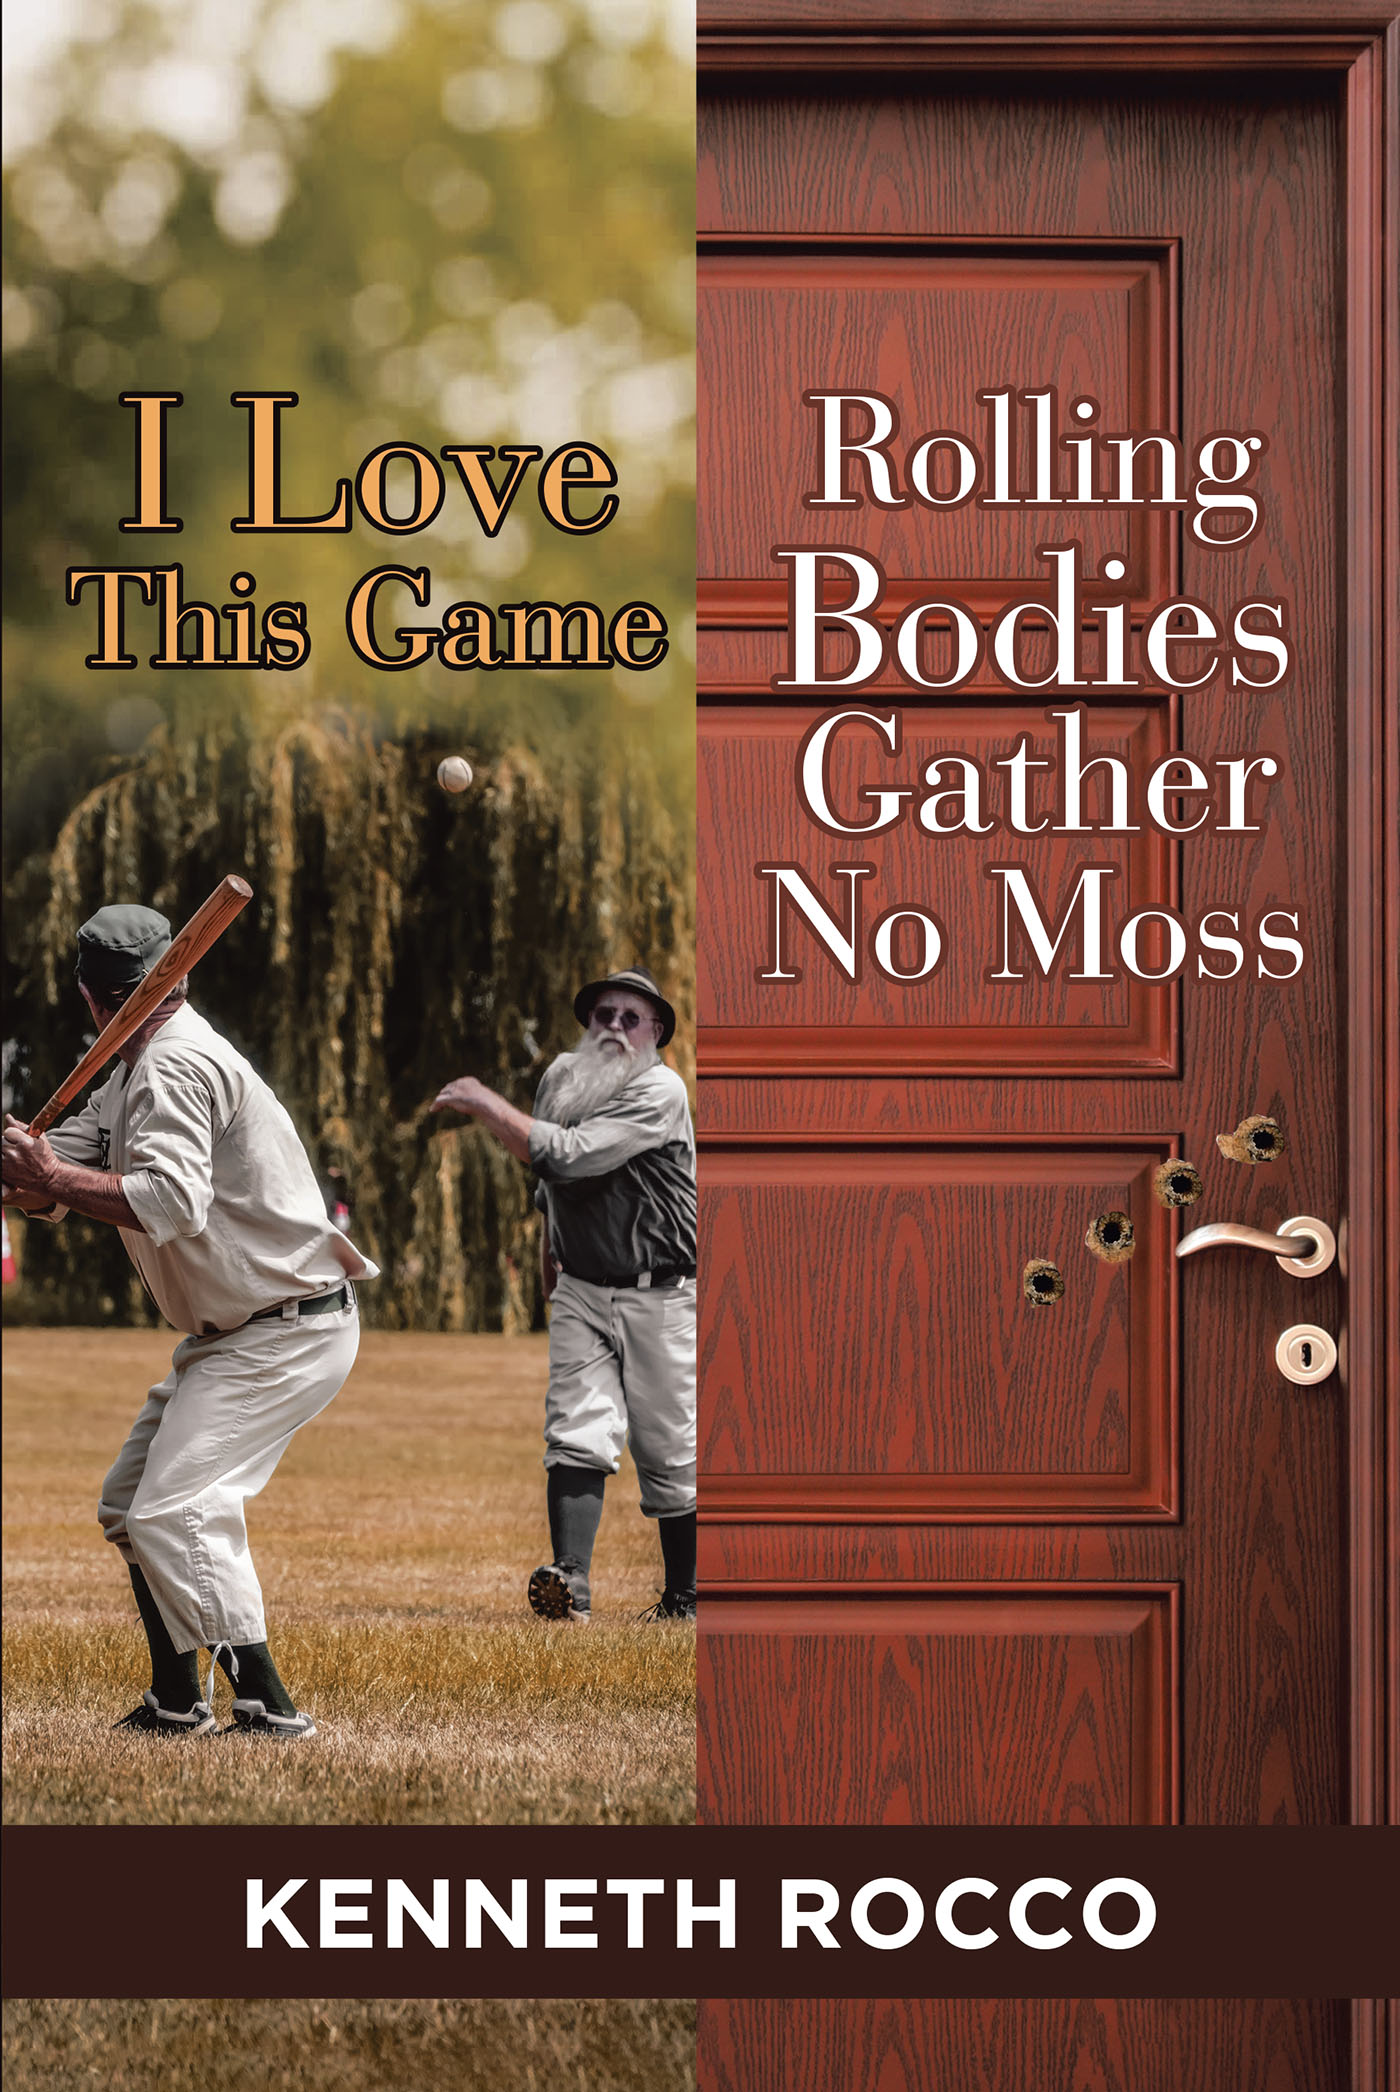 I Love This Game-Rolling Bodies Gather No Moss Cover Image